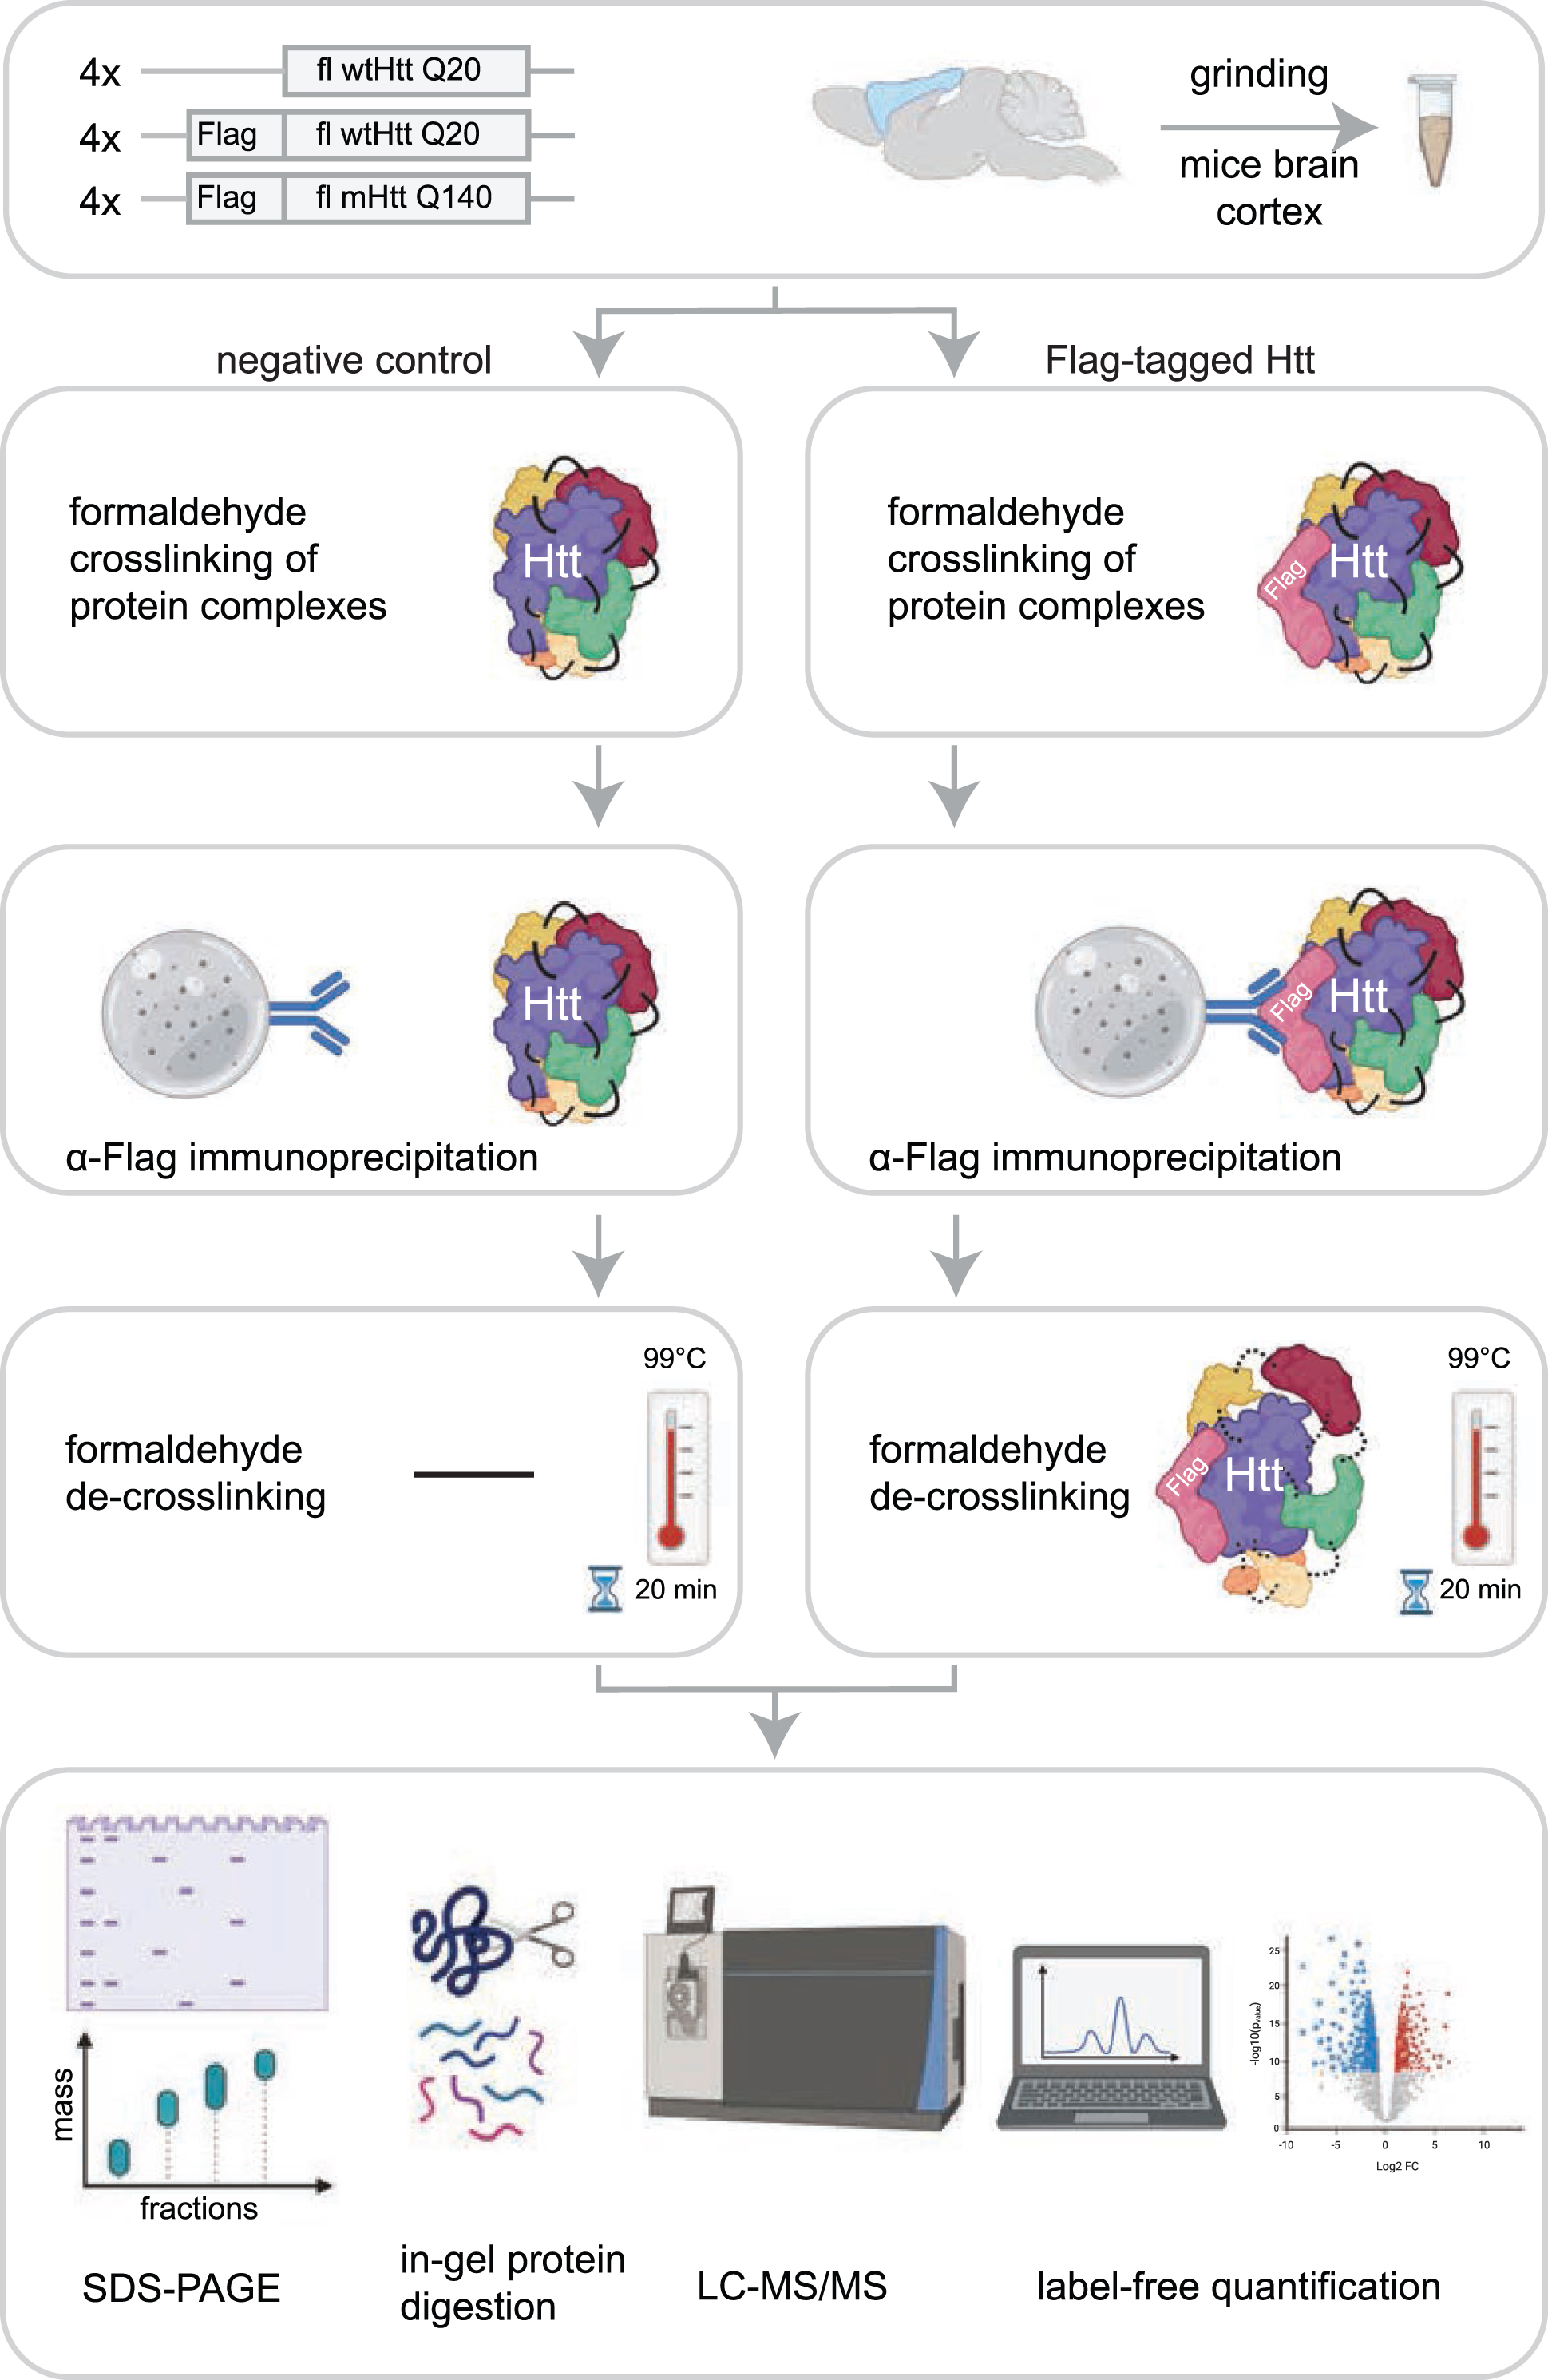 Workflow for identification of Htt interactors via crosslinking immunoprecipitation and mass spectrometry. The cortex brain regions of 2-month-old mice expressing fl wild-type Htt (wtHtt), Flag-tagged wtHtt and Flag-tagged mutant Htt (mHtt) were used in this study. Four biological replicates were analyzed for each sample. Protein complexes were crosslinked in grinded brain material using 0.5%formaldehyde and were subsequently enriched from lysates using α-Flag coupled beads. After several washing steps the protein complexes were de-crosslinked by boiling for 20 min at 99°C in sample loading buffer. Next, proteins were resolved by SDS-PAGE and analyzed using mass spectrometry-based label-free quantification.